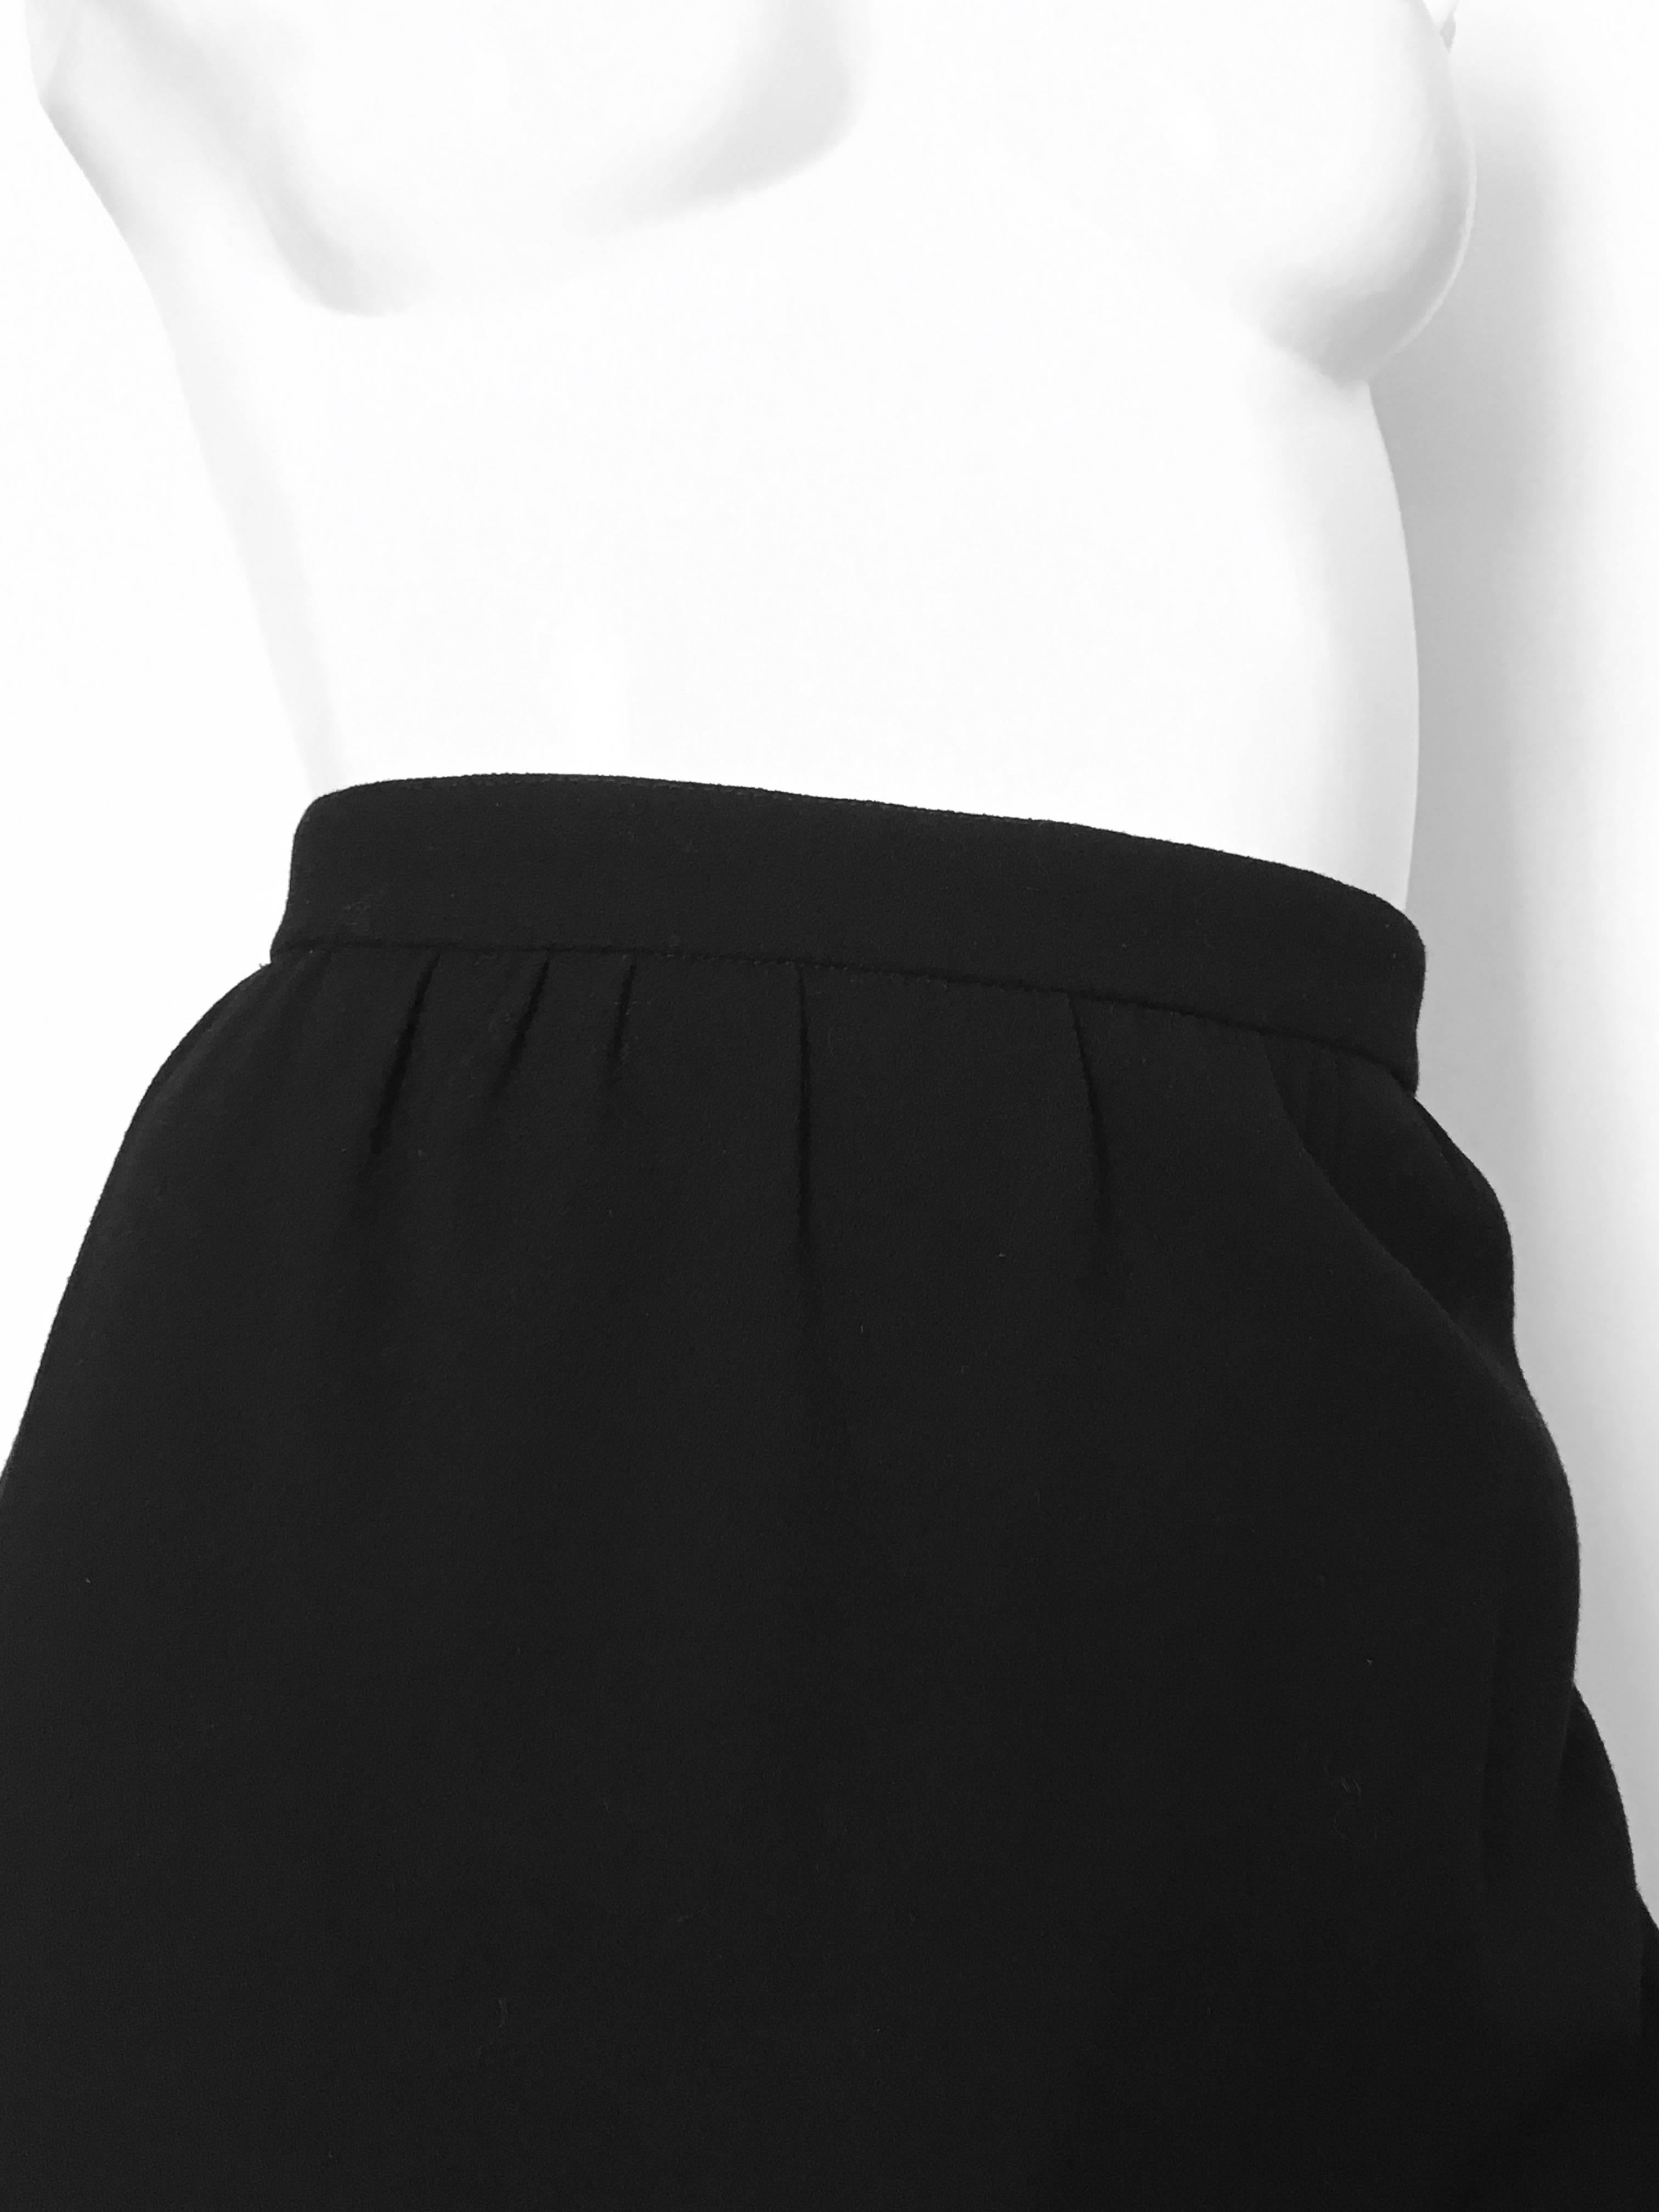 Chanel 1980s Black Wool Skirt with Pockets Size 12. In Excellent Condition For Sale In Atlanta, GA